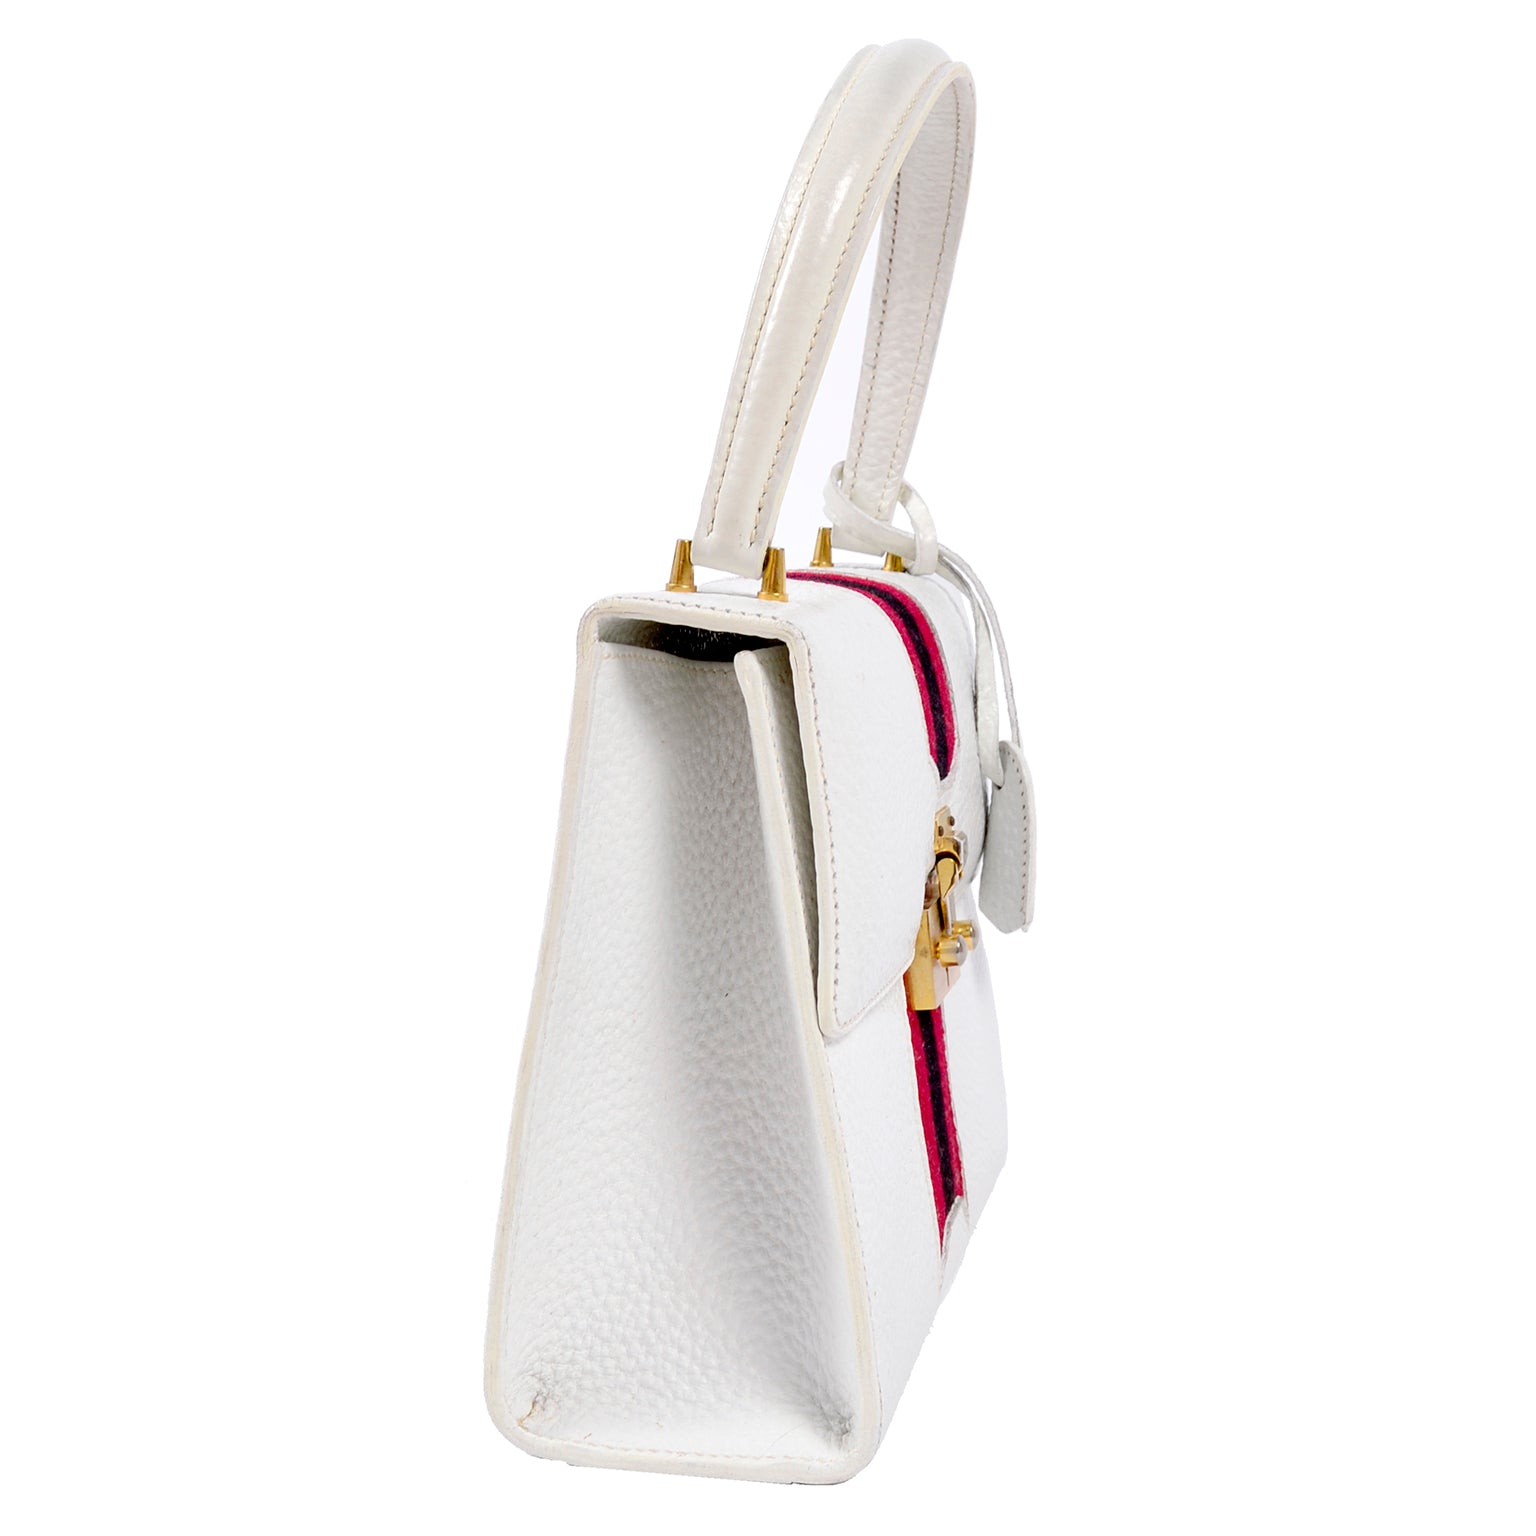 1960's Gucci Padlock Top Handle Handbag in White Leather With Stripes & Key  Lock